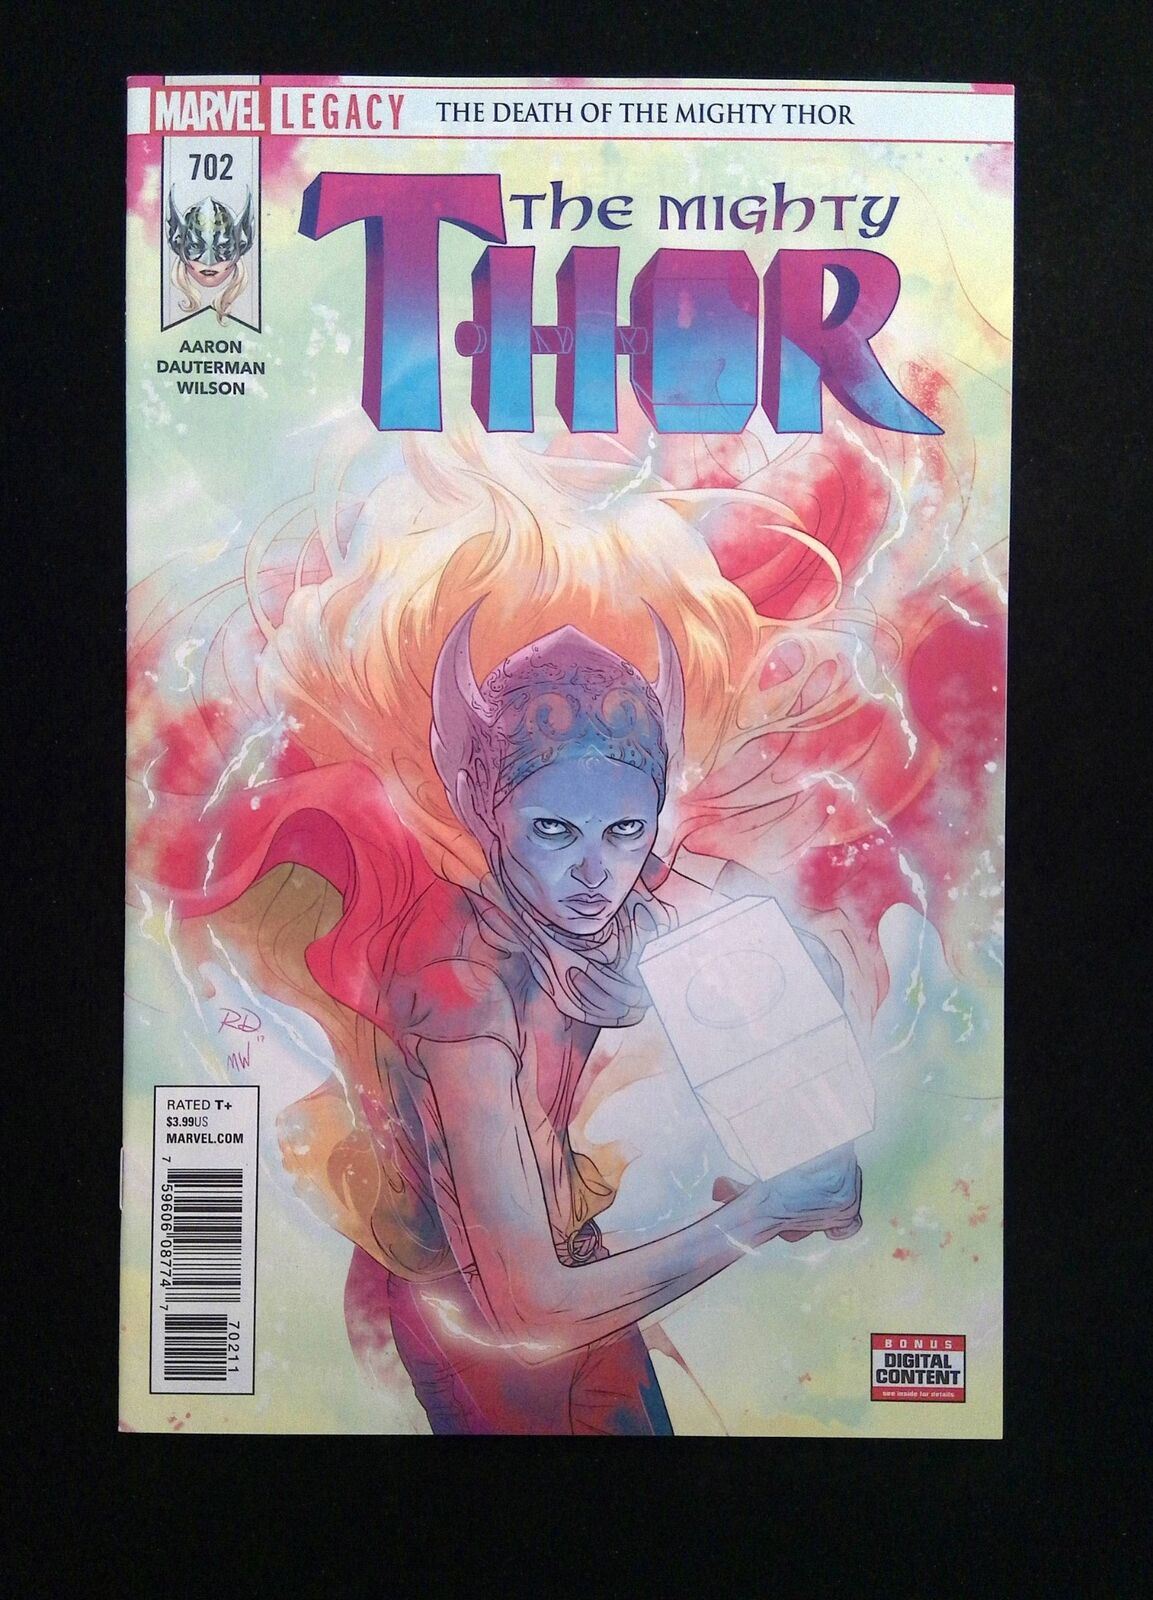 Mighty Thor #702 (3RD SERIES) MARVEL Comics 2018 NM